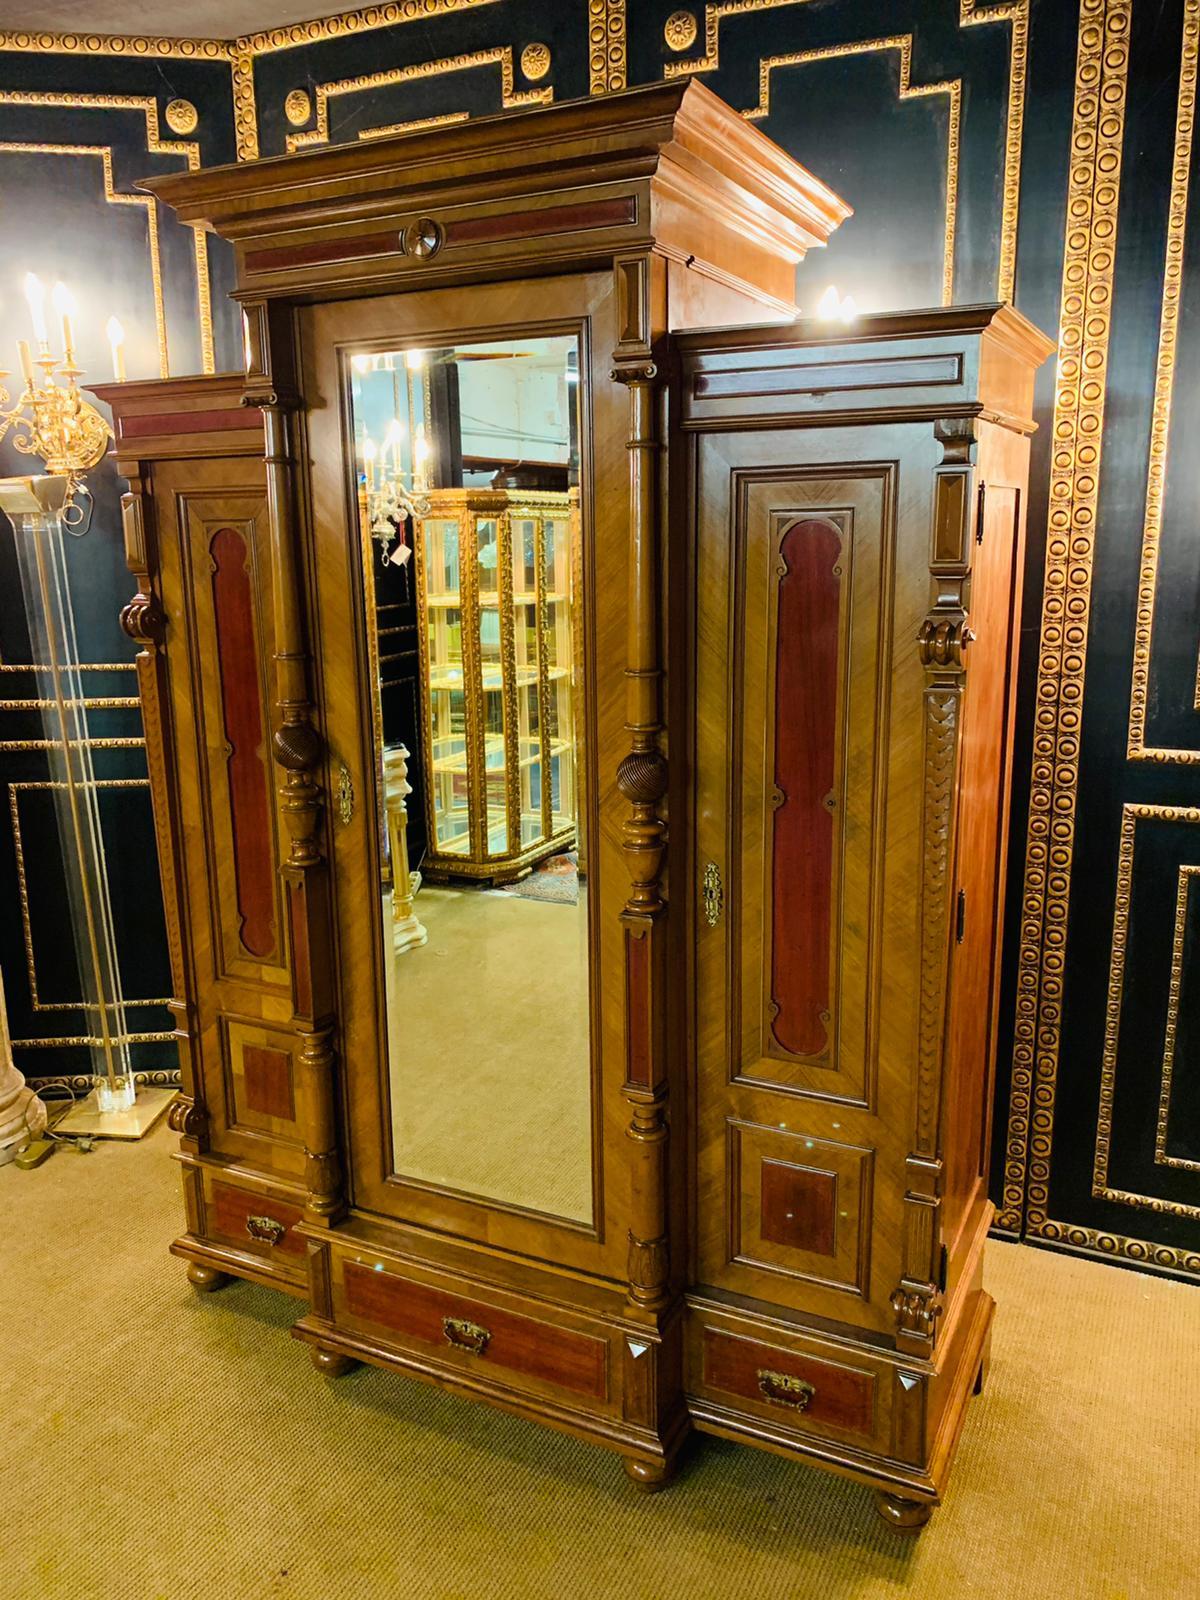 Beautiful large Wilhelminian style wardrobe - Berlin from around 1880 in walnut & solid oak. The cabinet as well as the entire veneer is in a very nice, original, well-kept condition. The entire upper cornice, pillars, cornice, feet, faceted